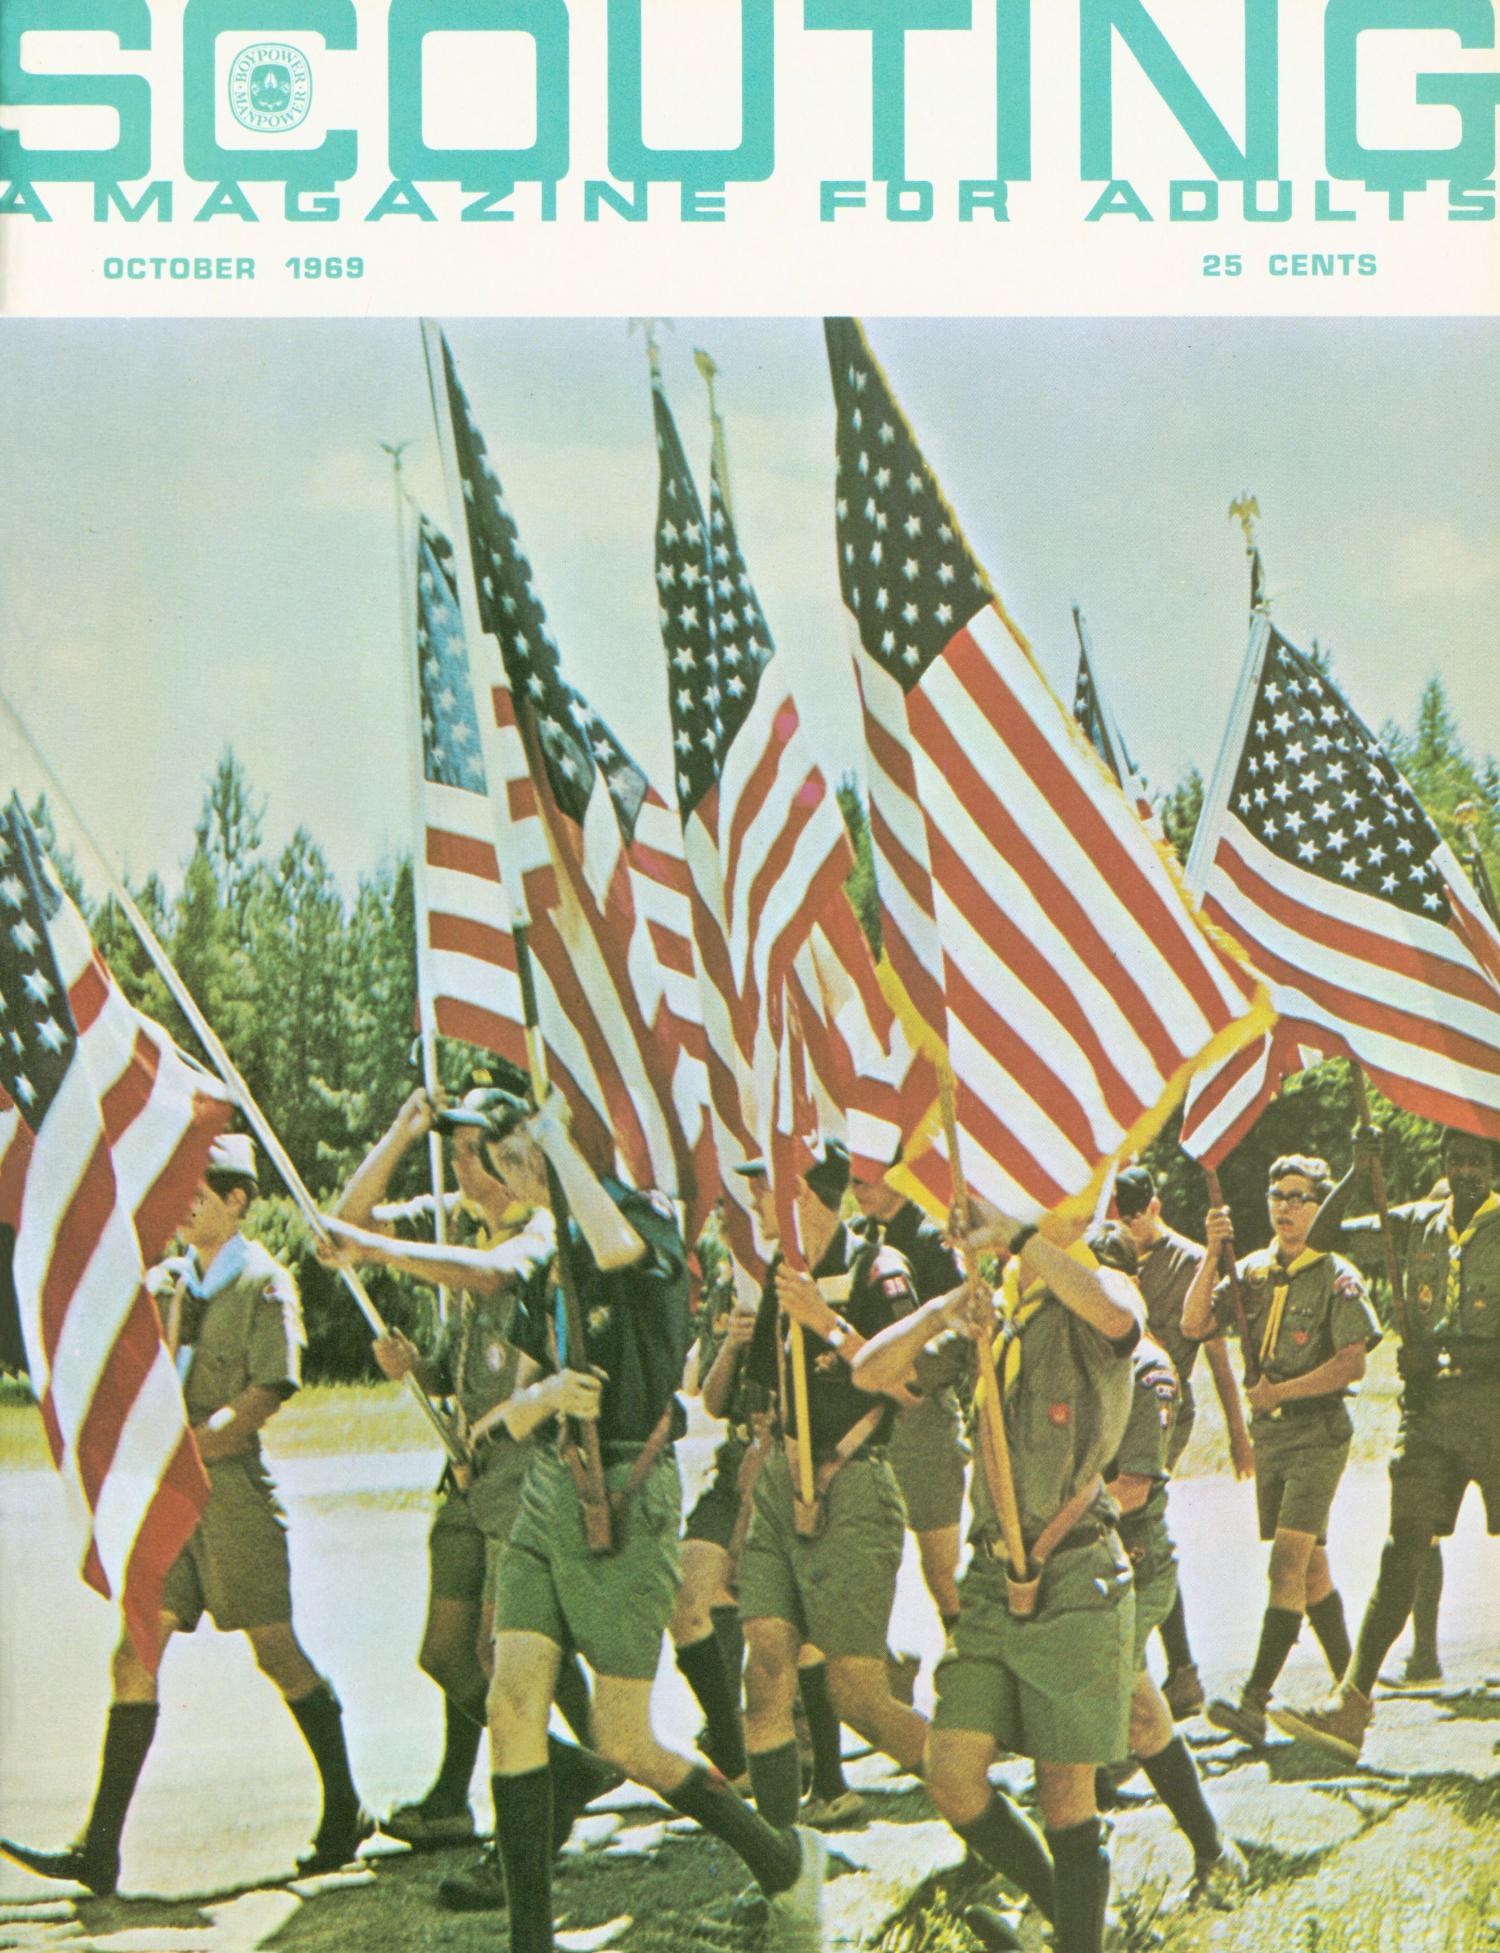 Scouting, Volume 57, Number 8, October 1969
                                                
                                                    Front Cover
                                                